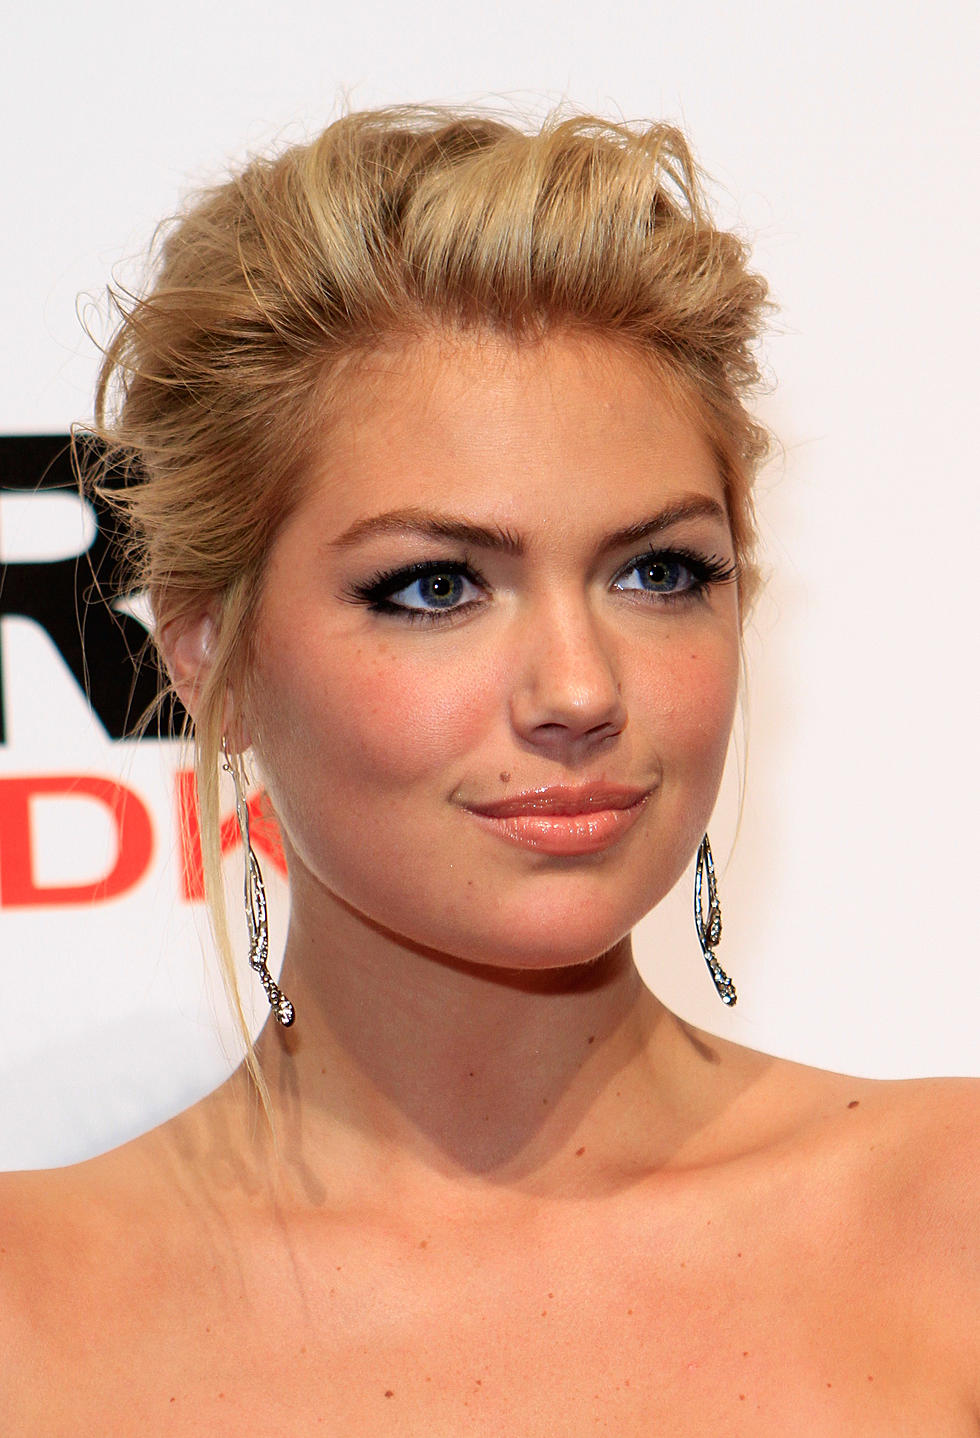 Honey, Can We Go Out for Burgers Tonight? Kate Upton [VIDEO]